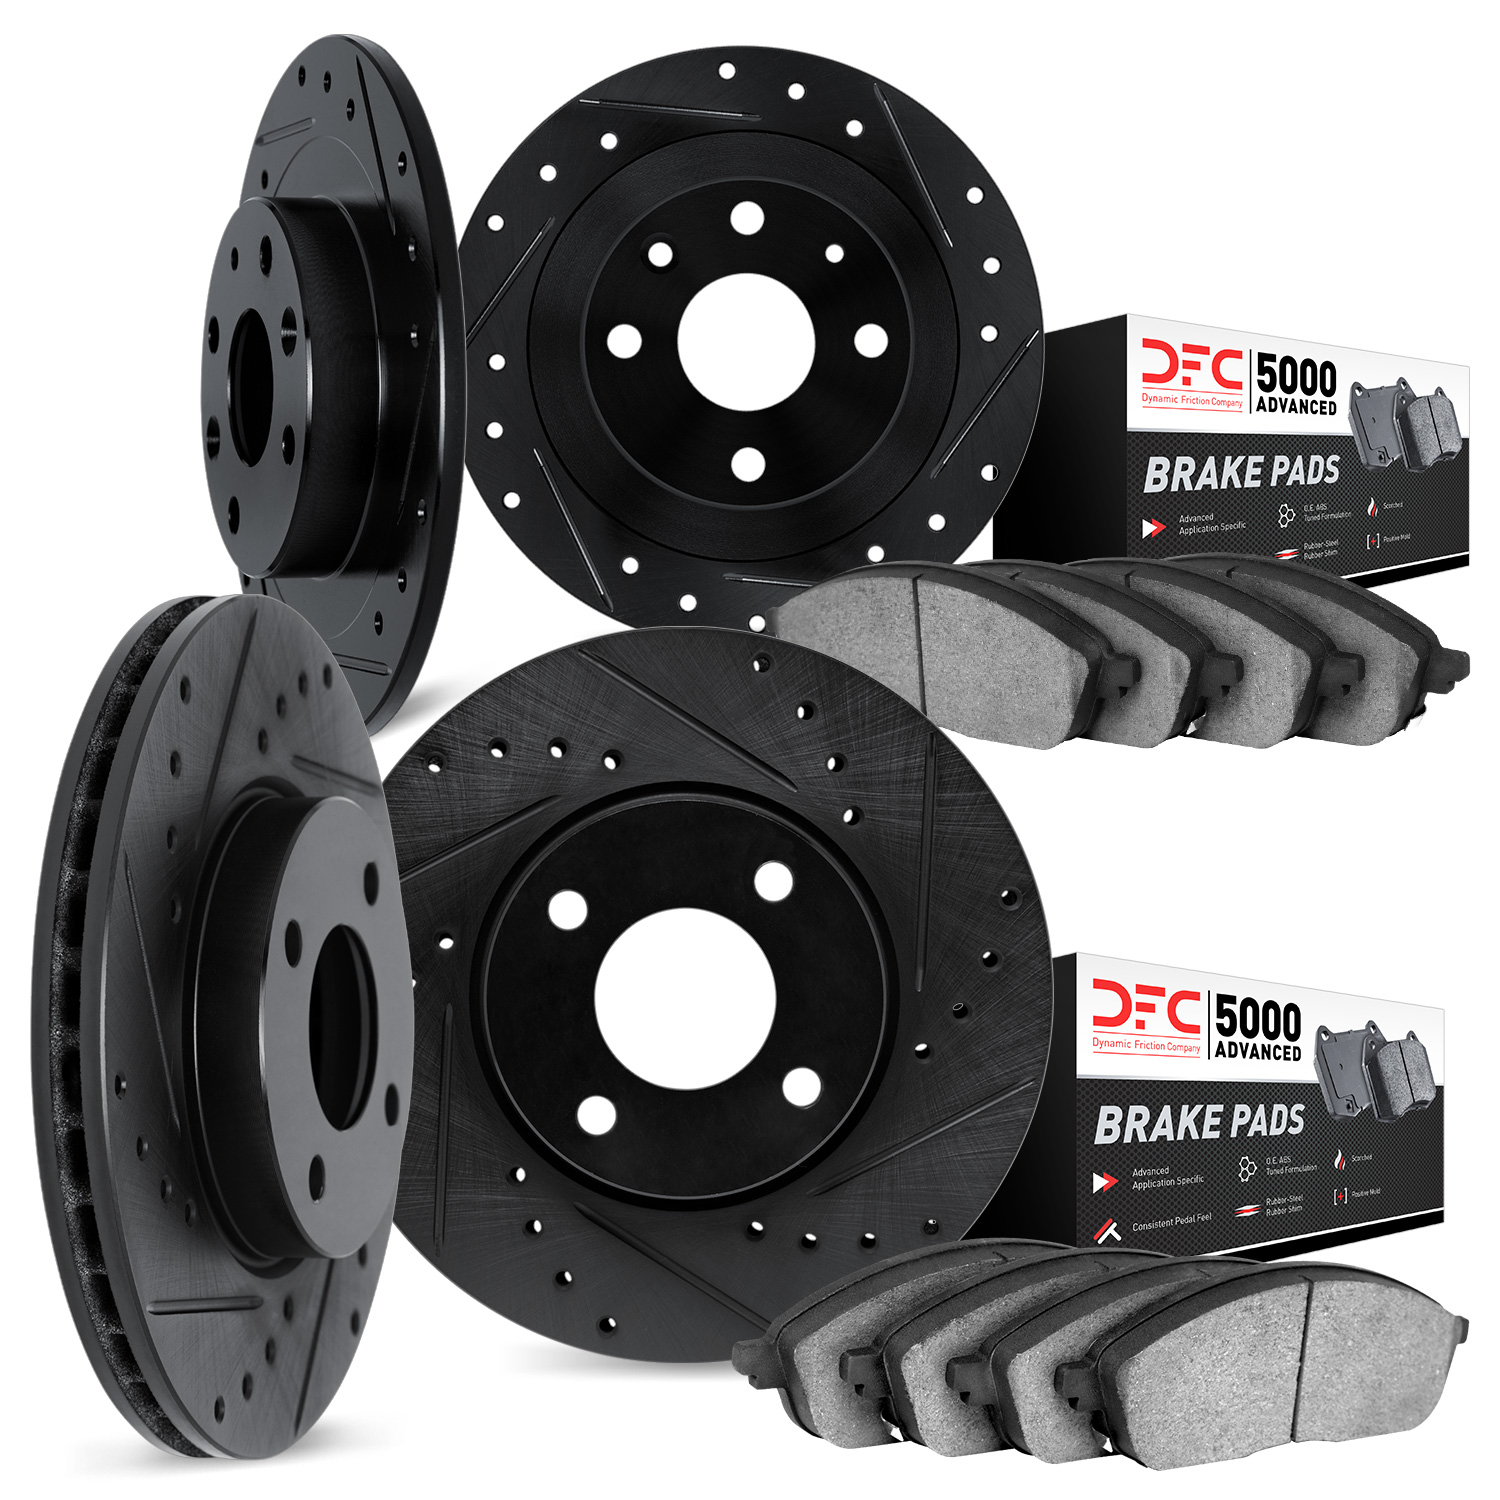 8504-58001 Drilled/Slotted Brake Rotors w/5000 Advanced Brake Pads Kit [Black], 1986-1987 Acura/Honda, Position: Front and Rear